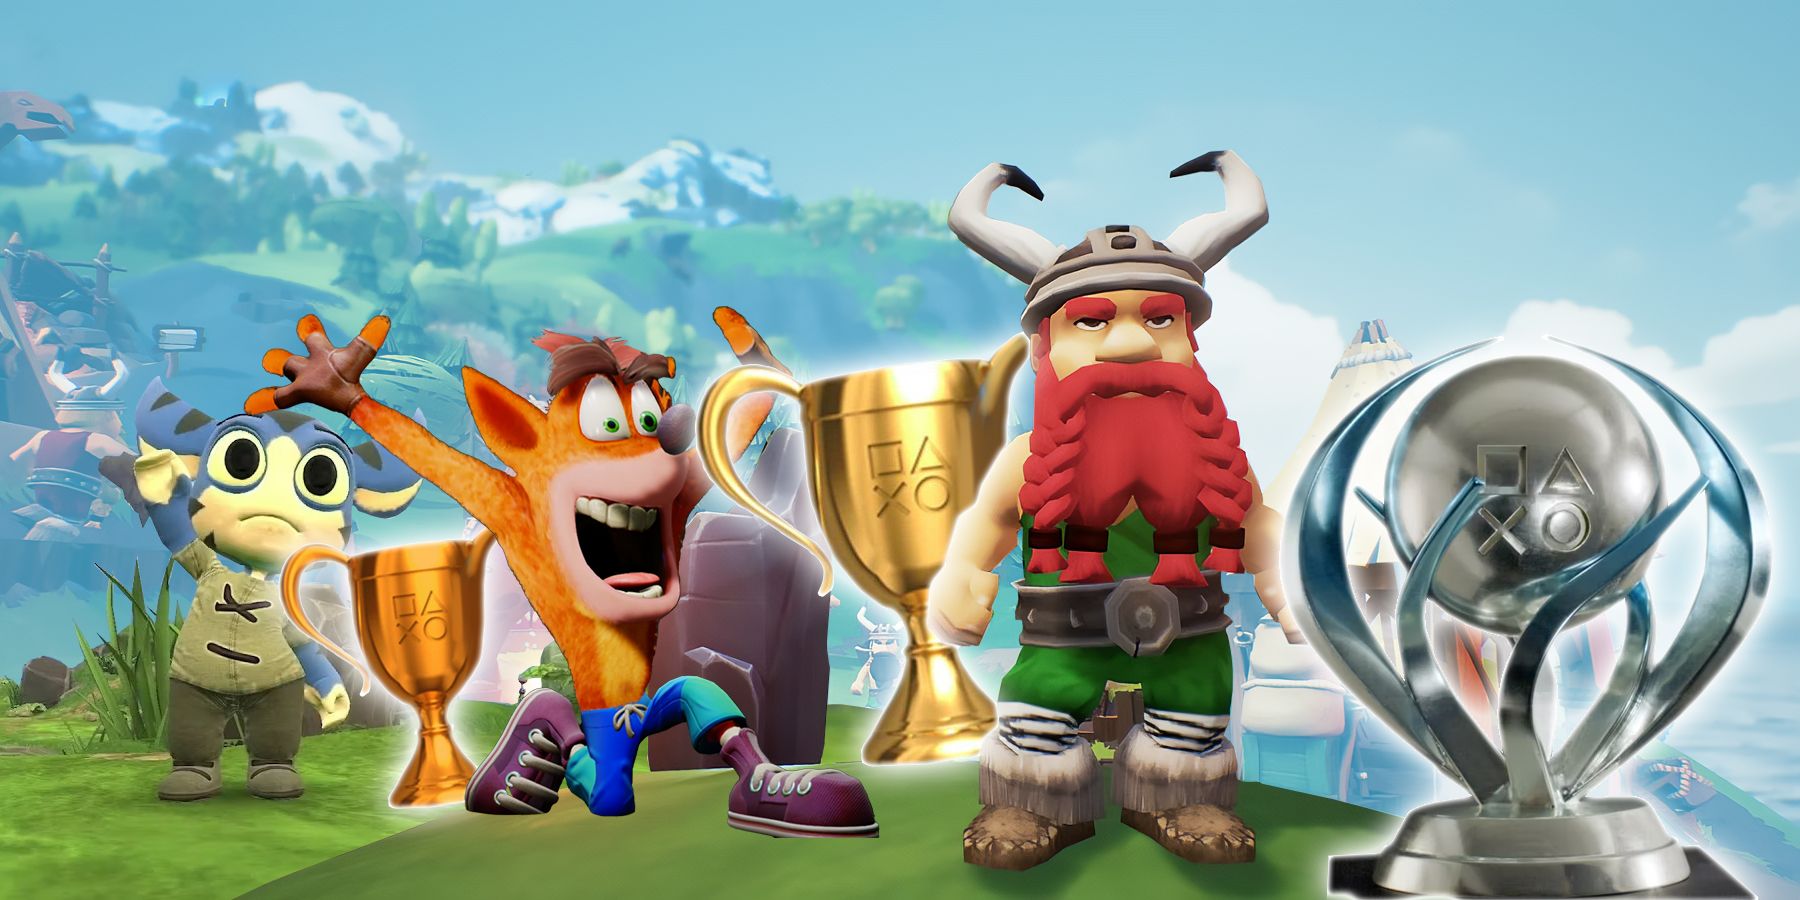 Valhalla, Crash Bandicoot, and Tethered are some of the hardest Platinum Trophies to get on PS4